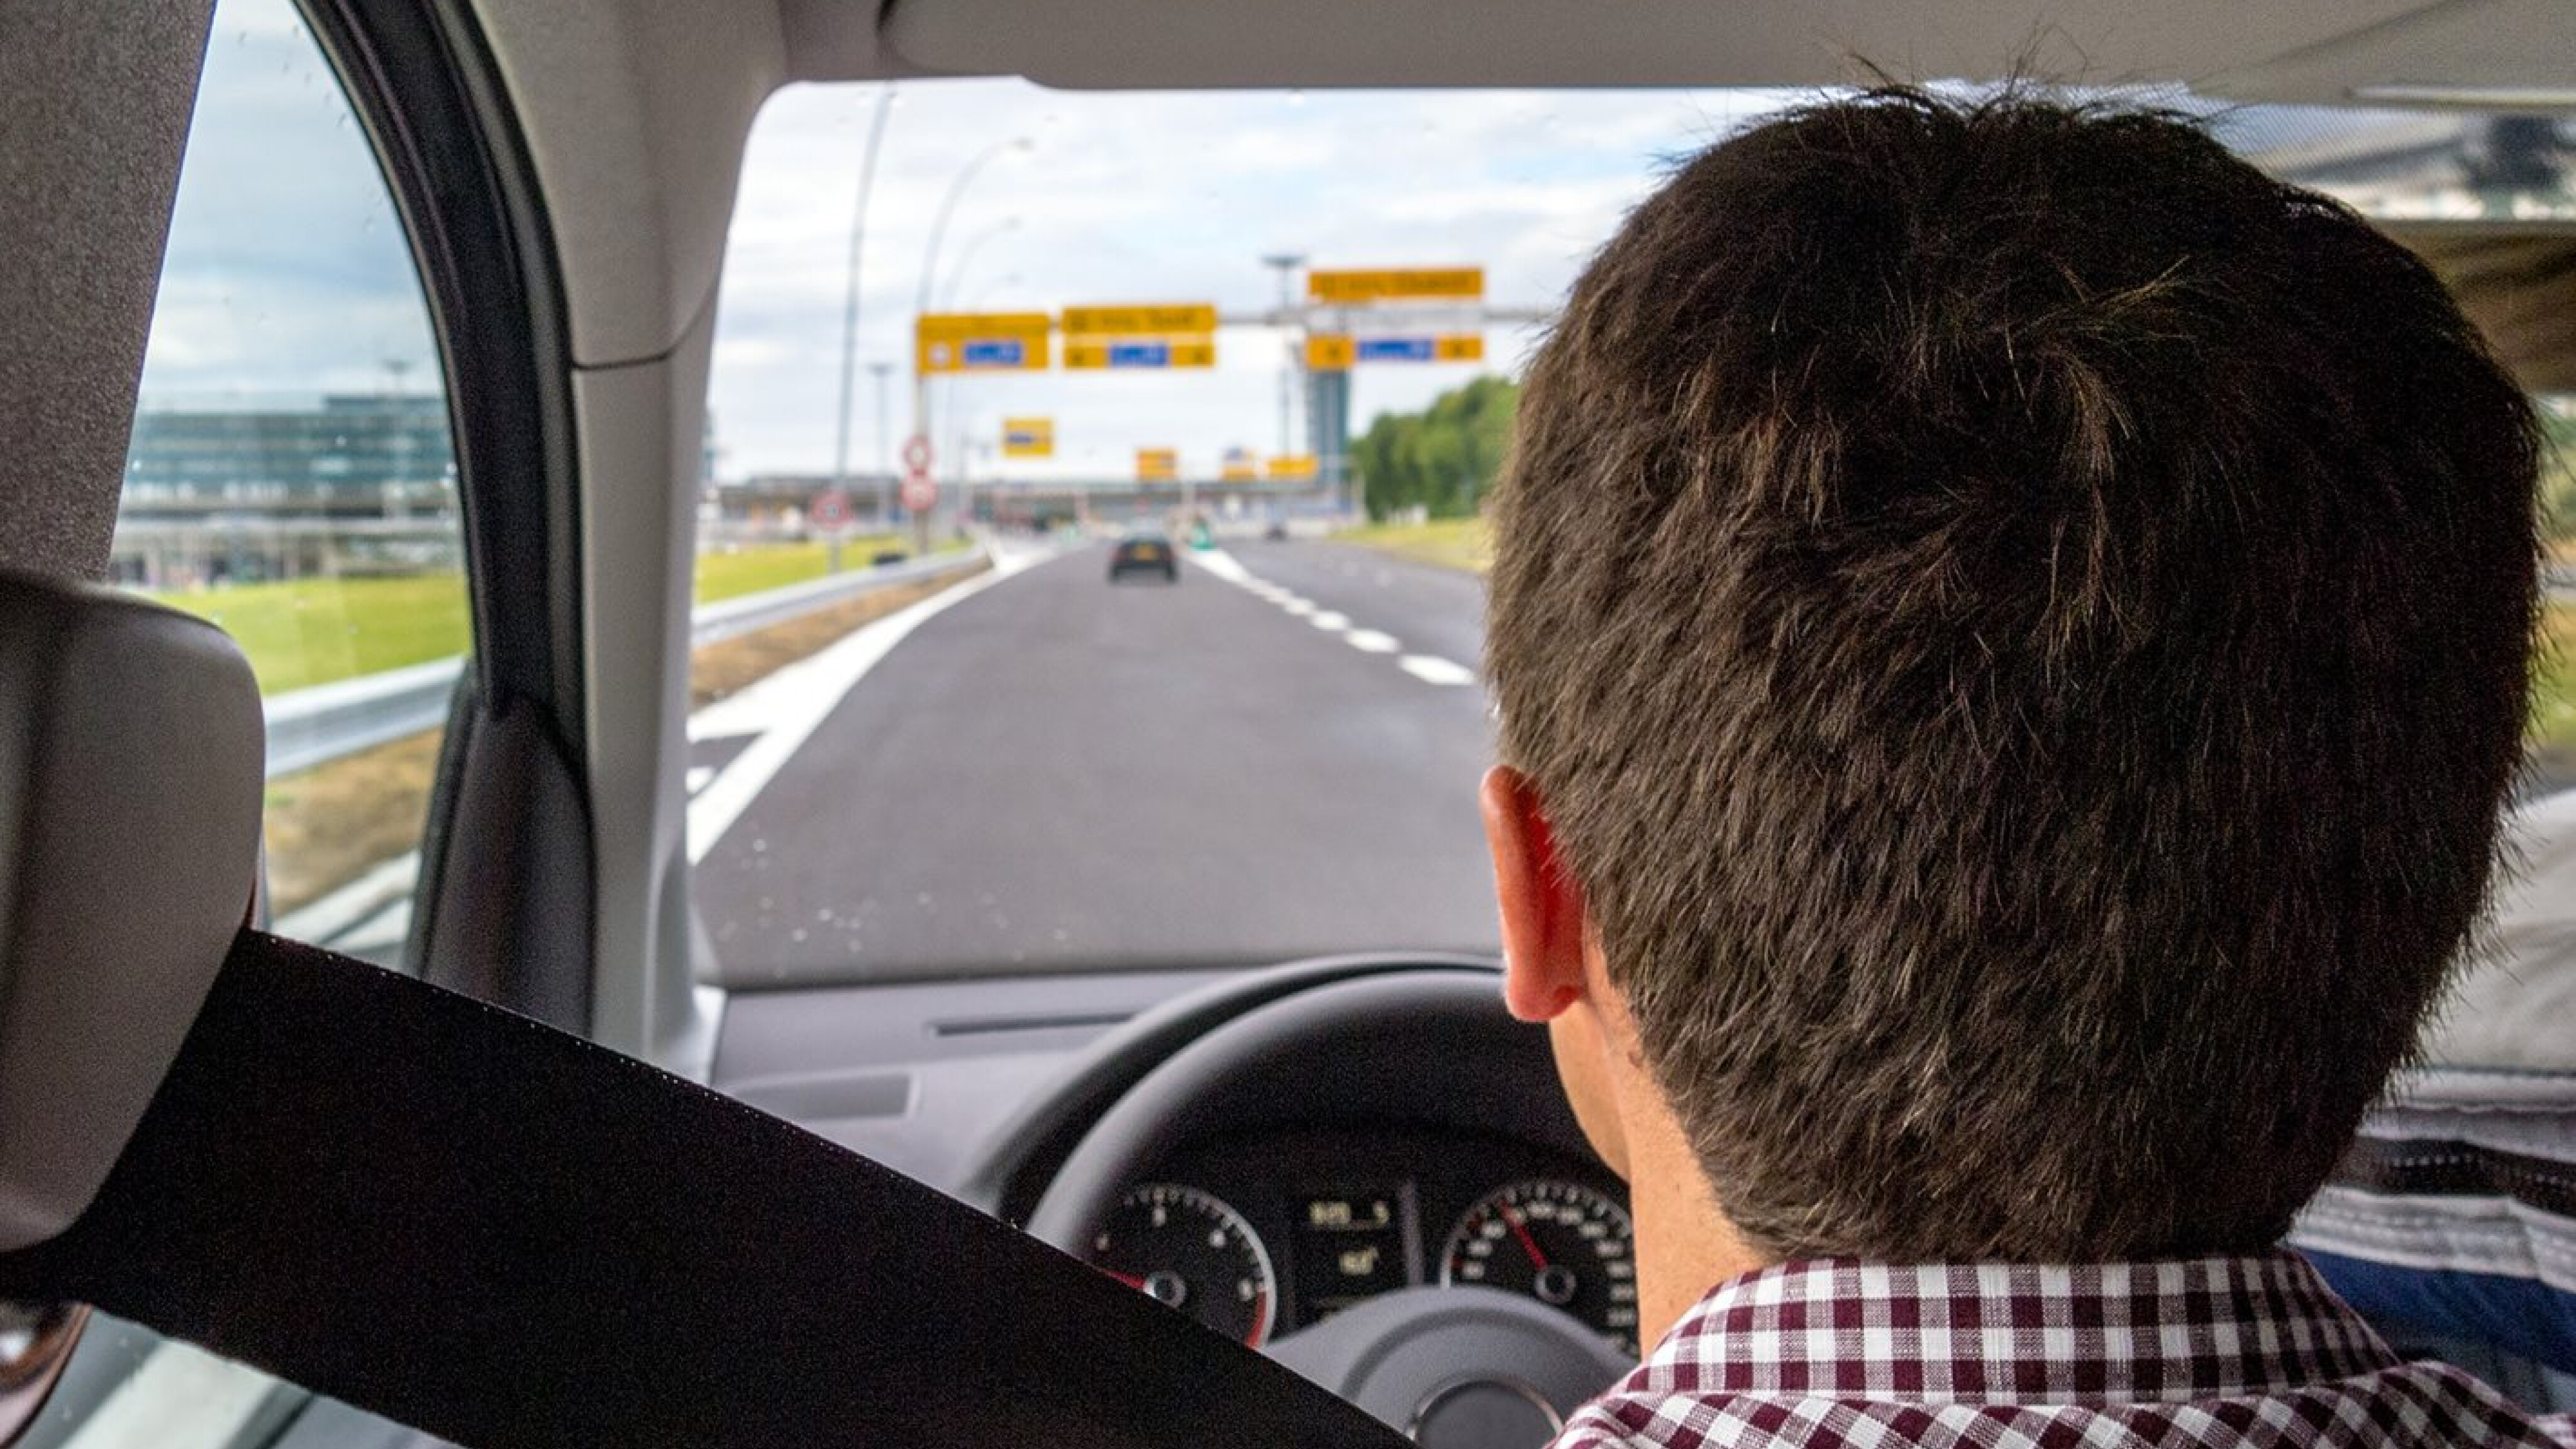 15 tips for driving on the left side of the road